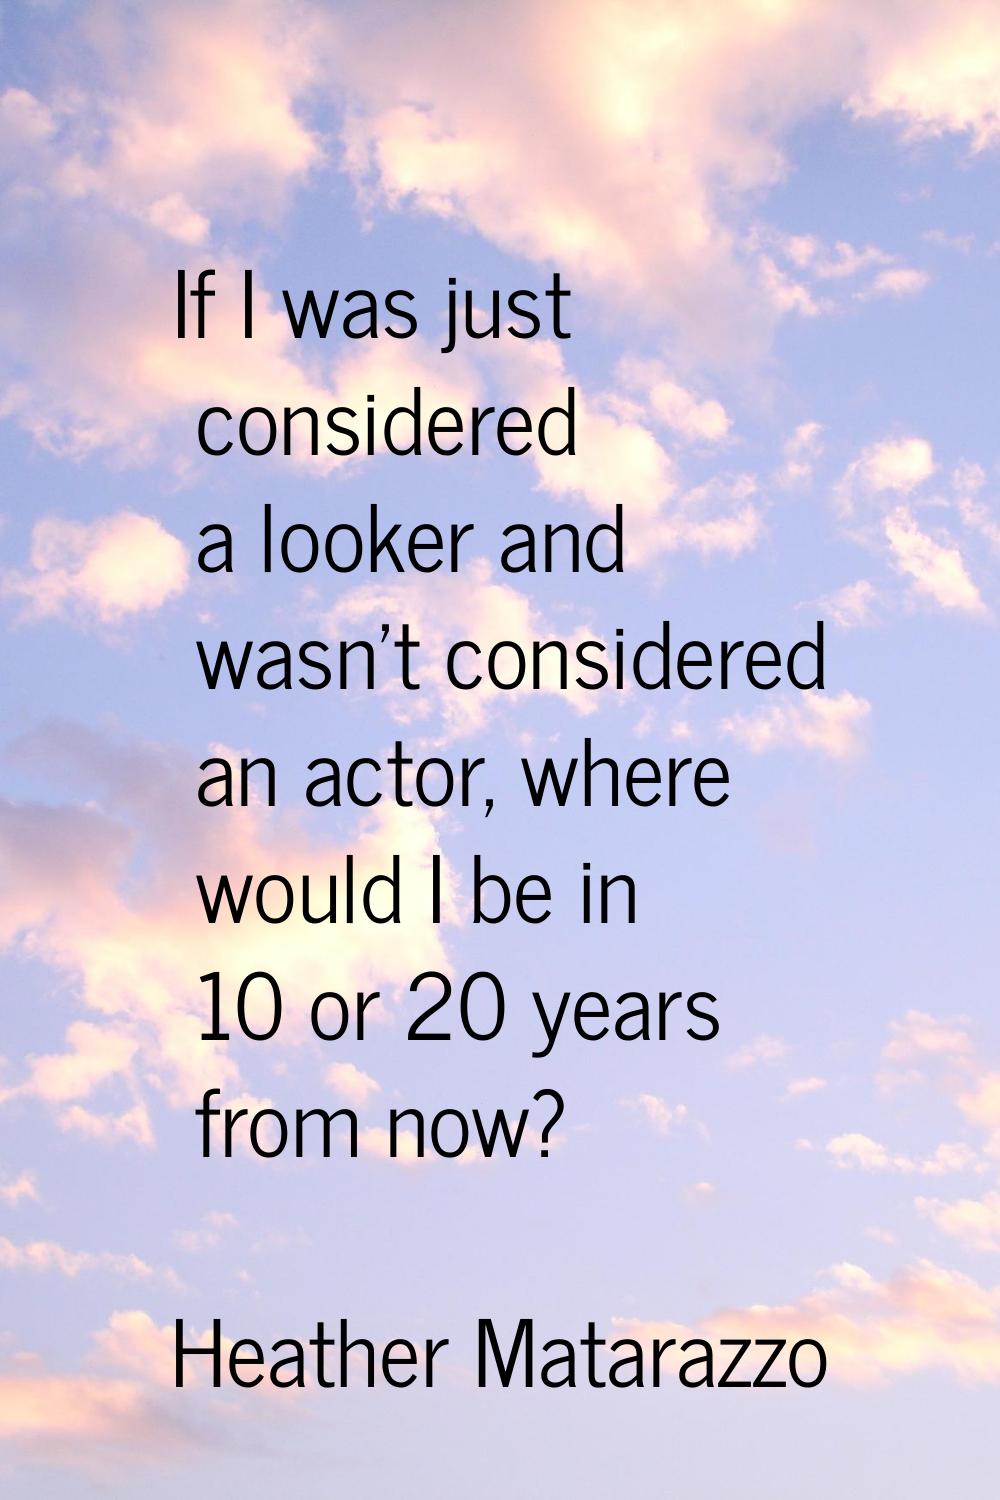 If I was just considered a looker and wasn't considered an actor, where would I be in 10 or 20 year